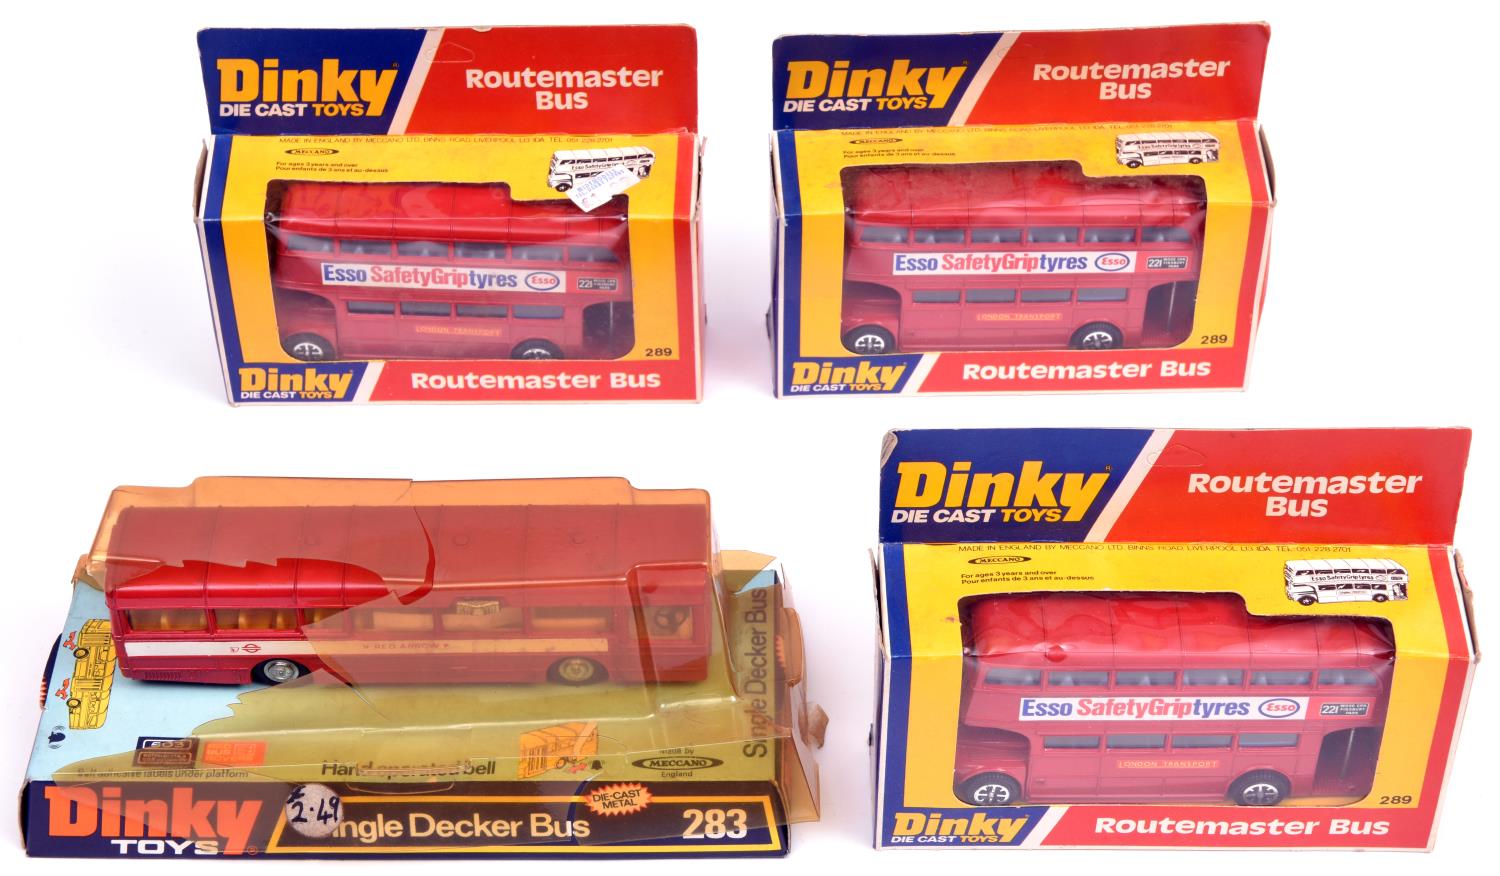 4x Dinky Toys buses. Single Decker Bus (283). 3x Routemaster Bus (289), Esso Safety Grip Tyres.